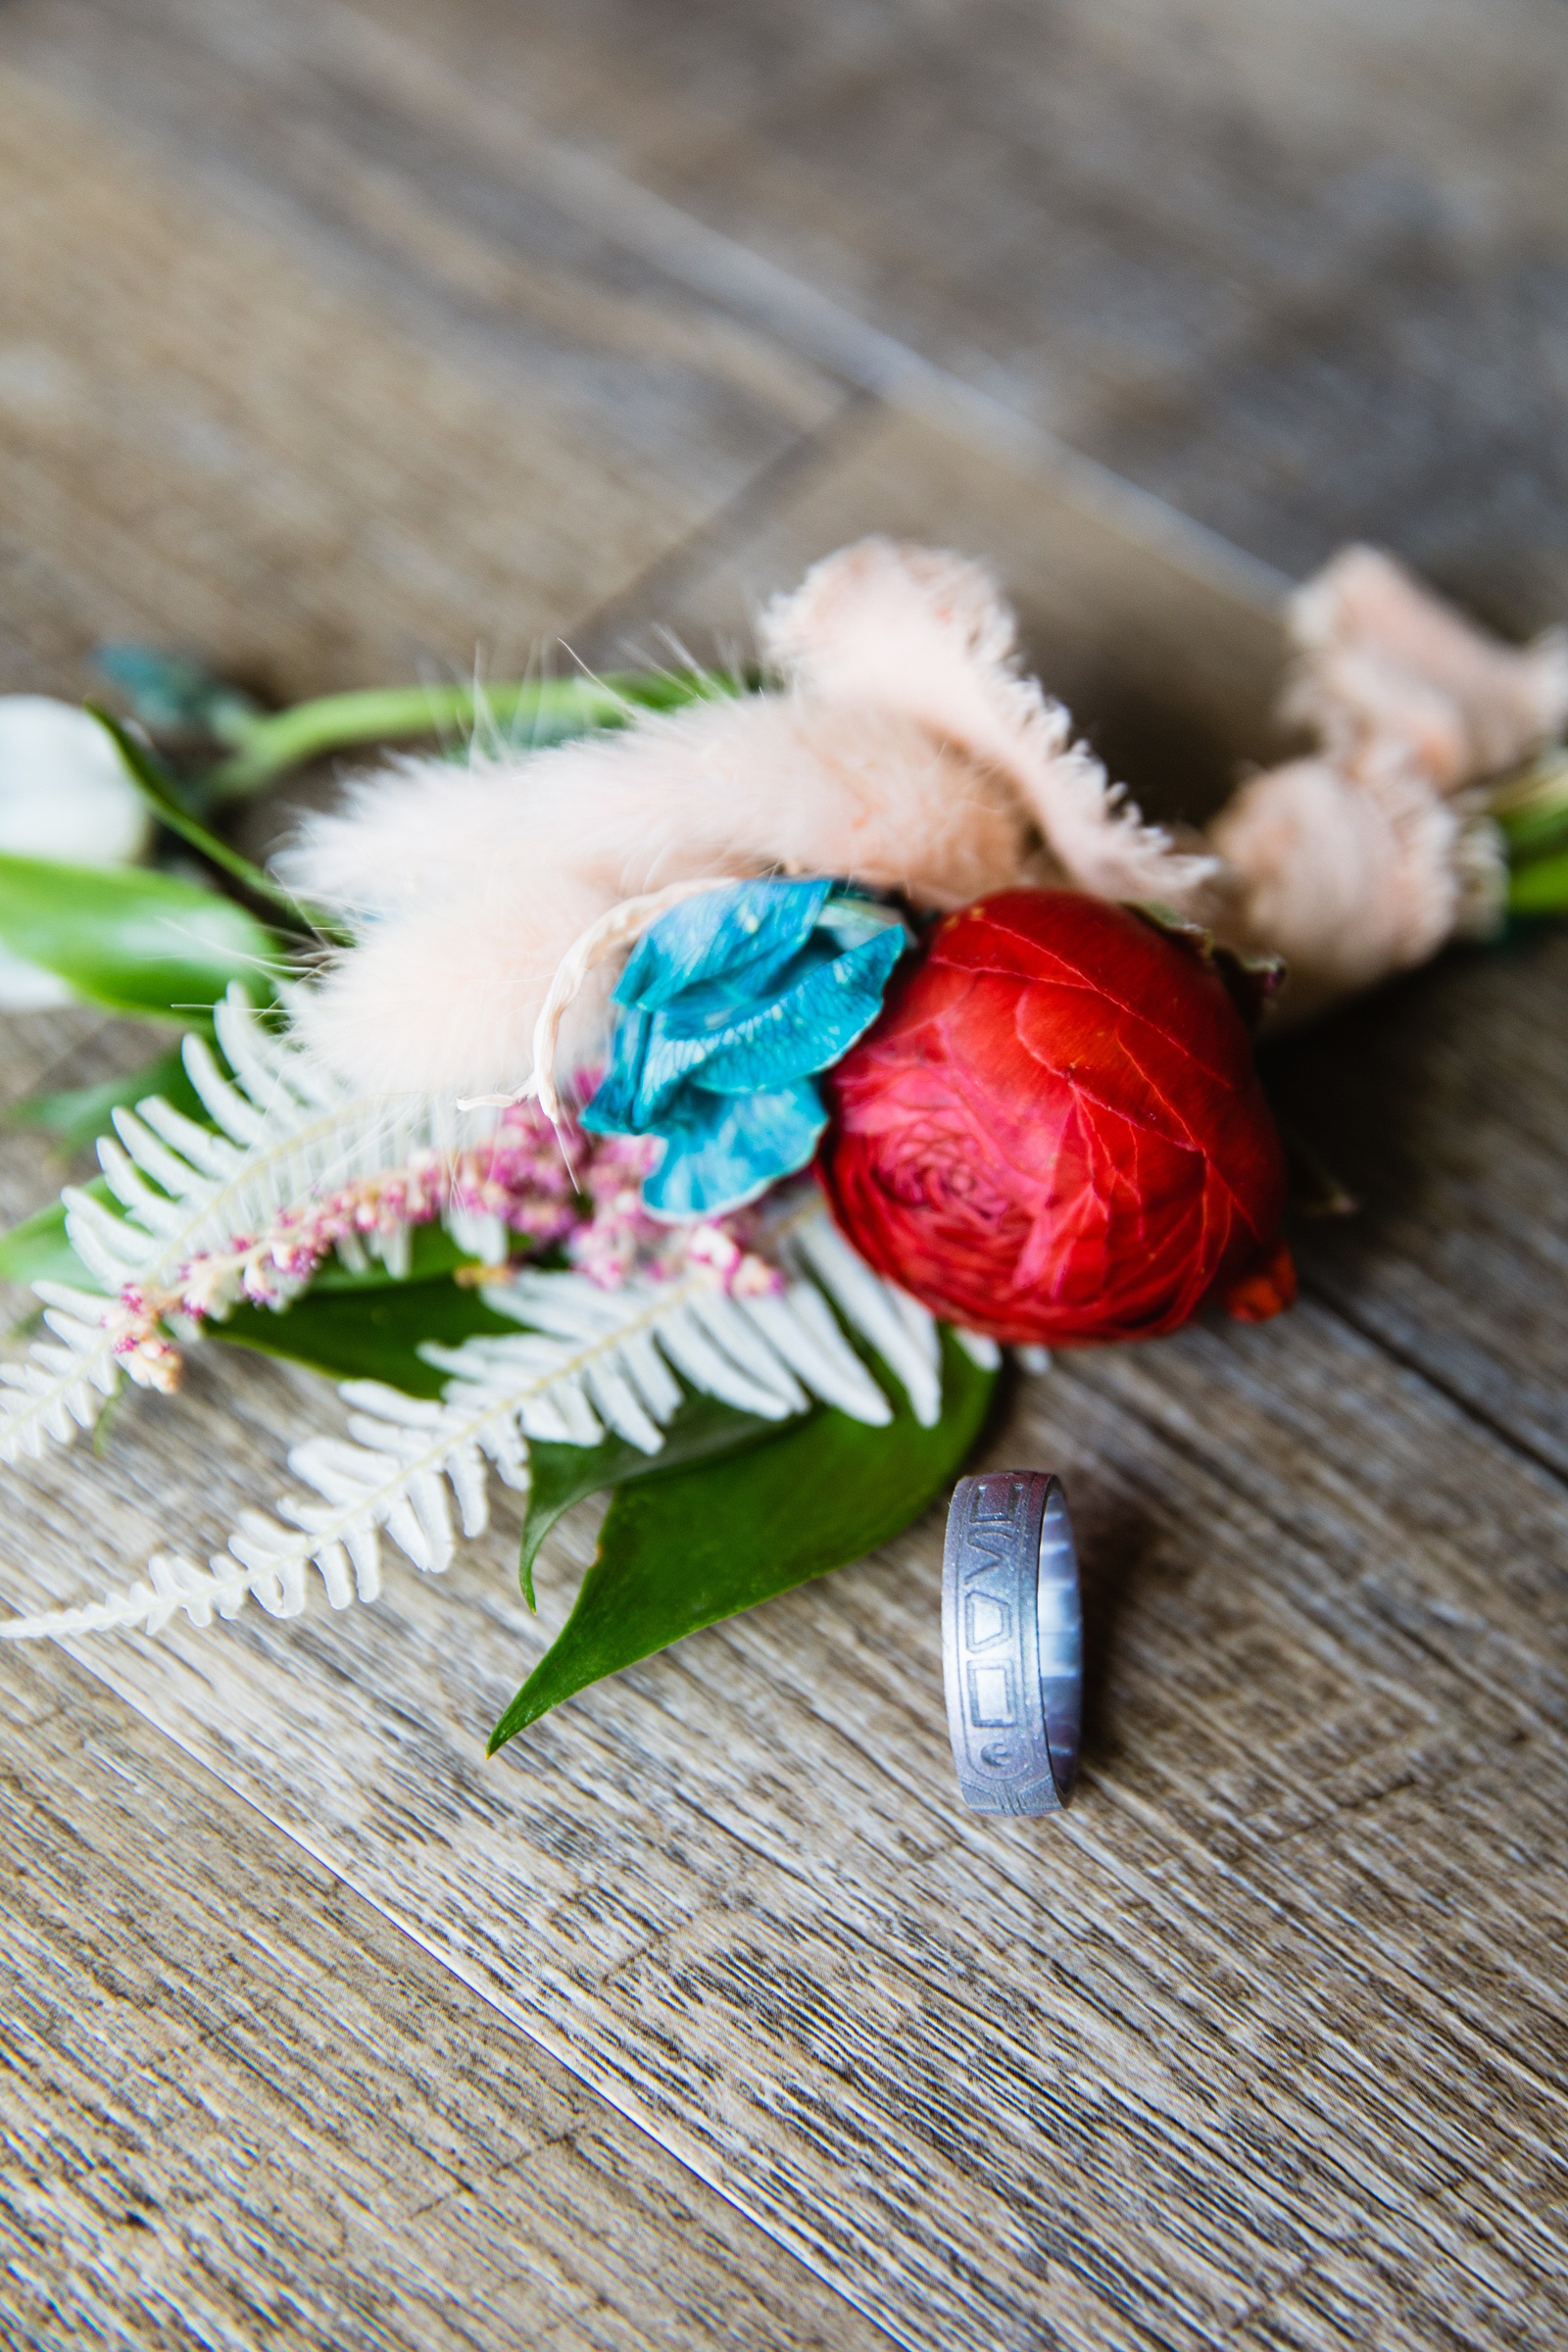 Groom's wedding day details of boutonniere and Star Wars wedding ring by PMA Photography.